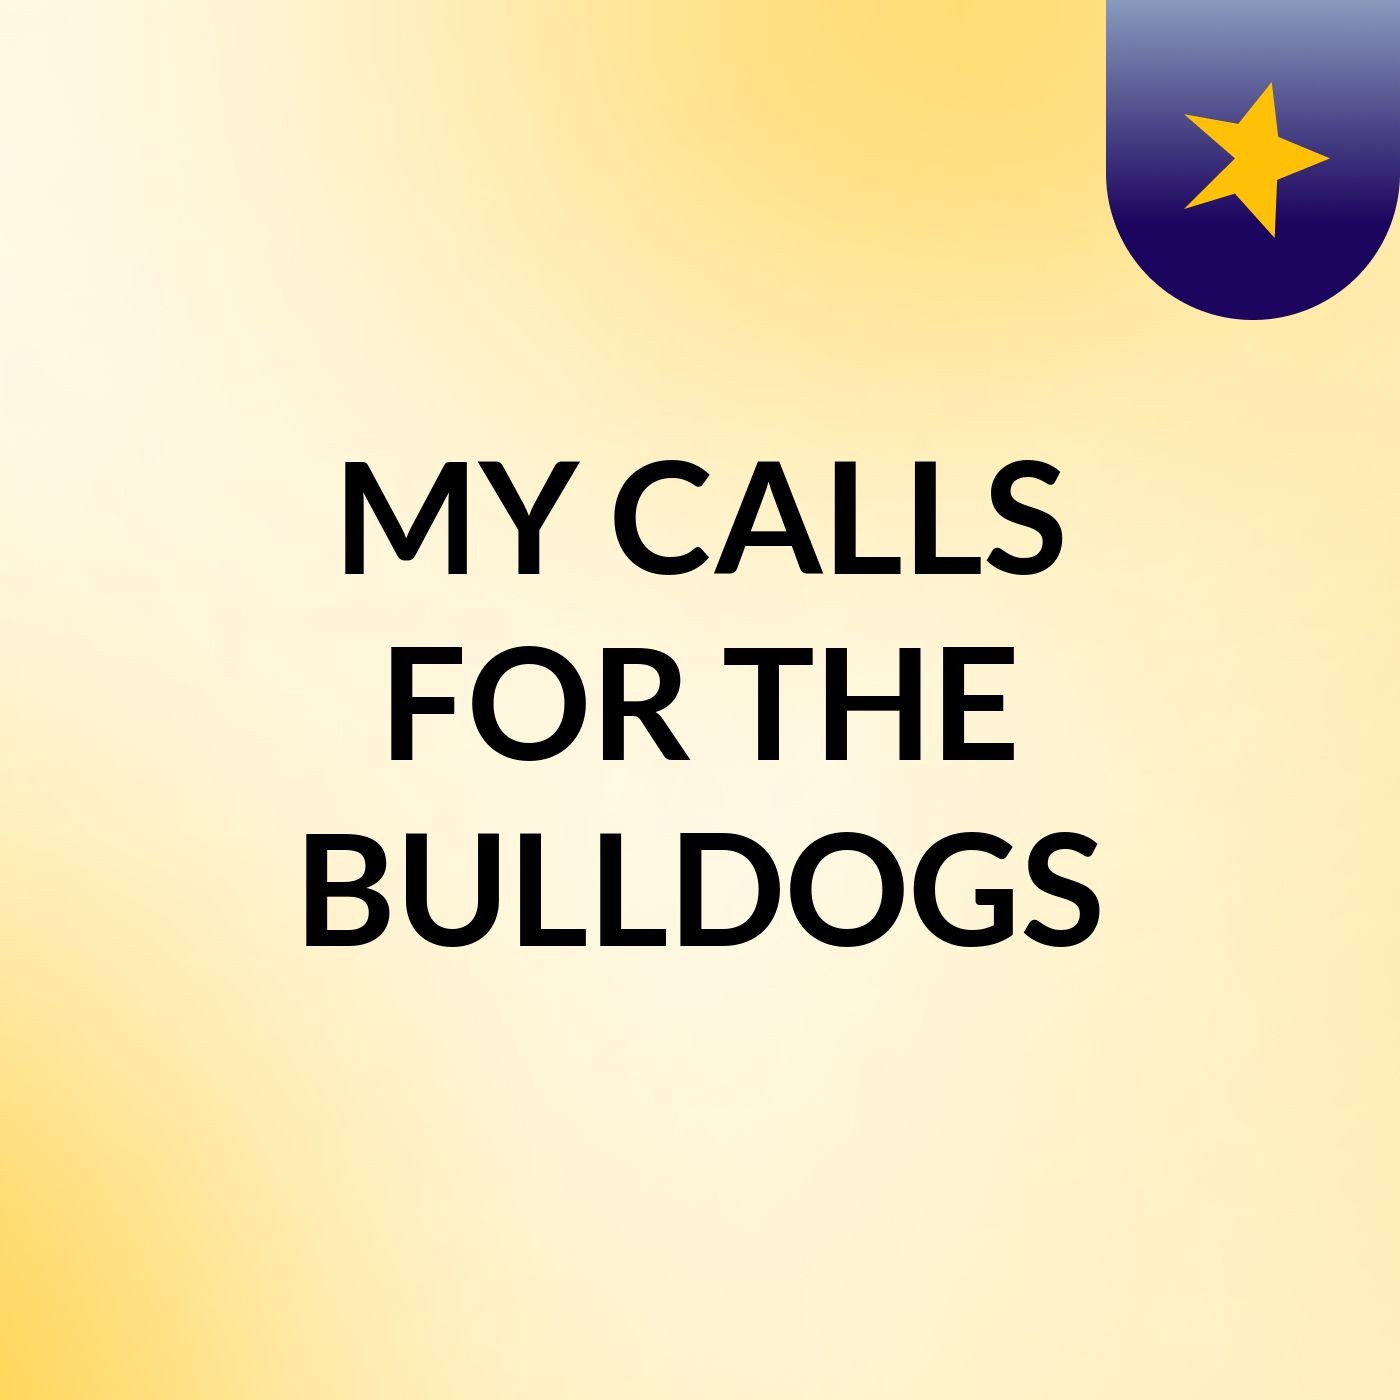 MY CALLS FOR THE BULLDOGS